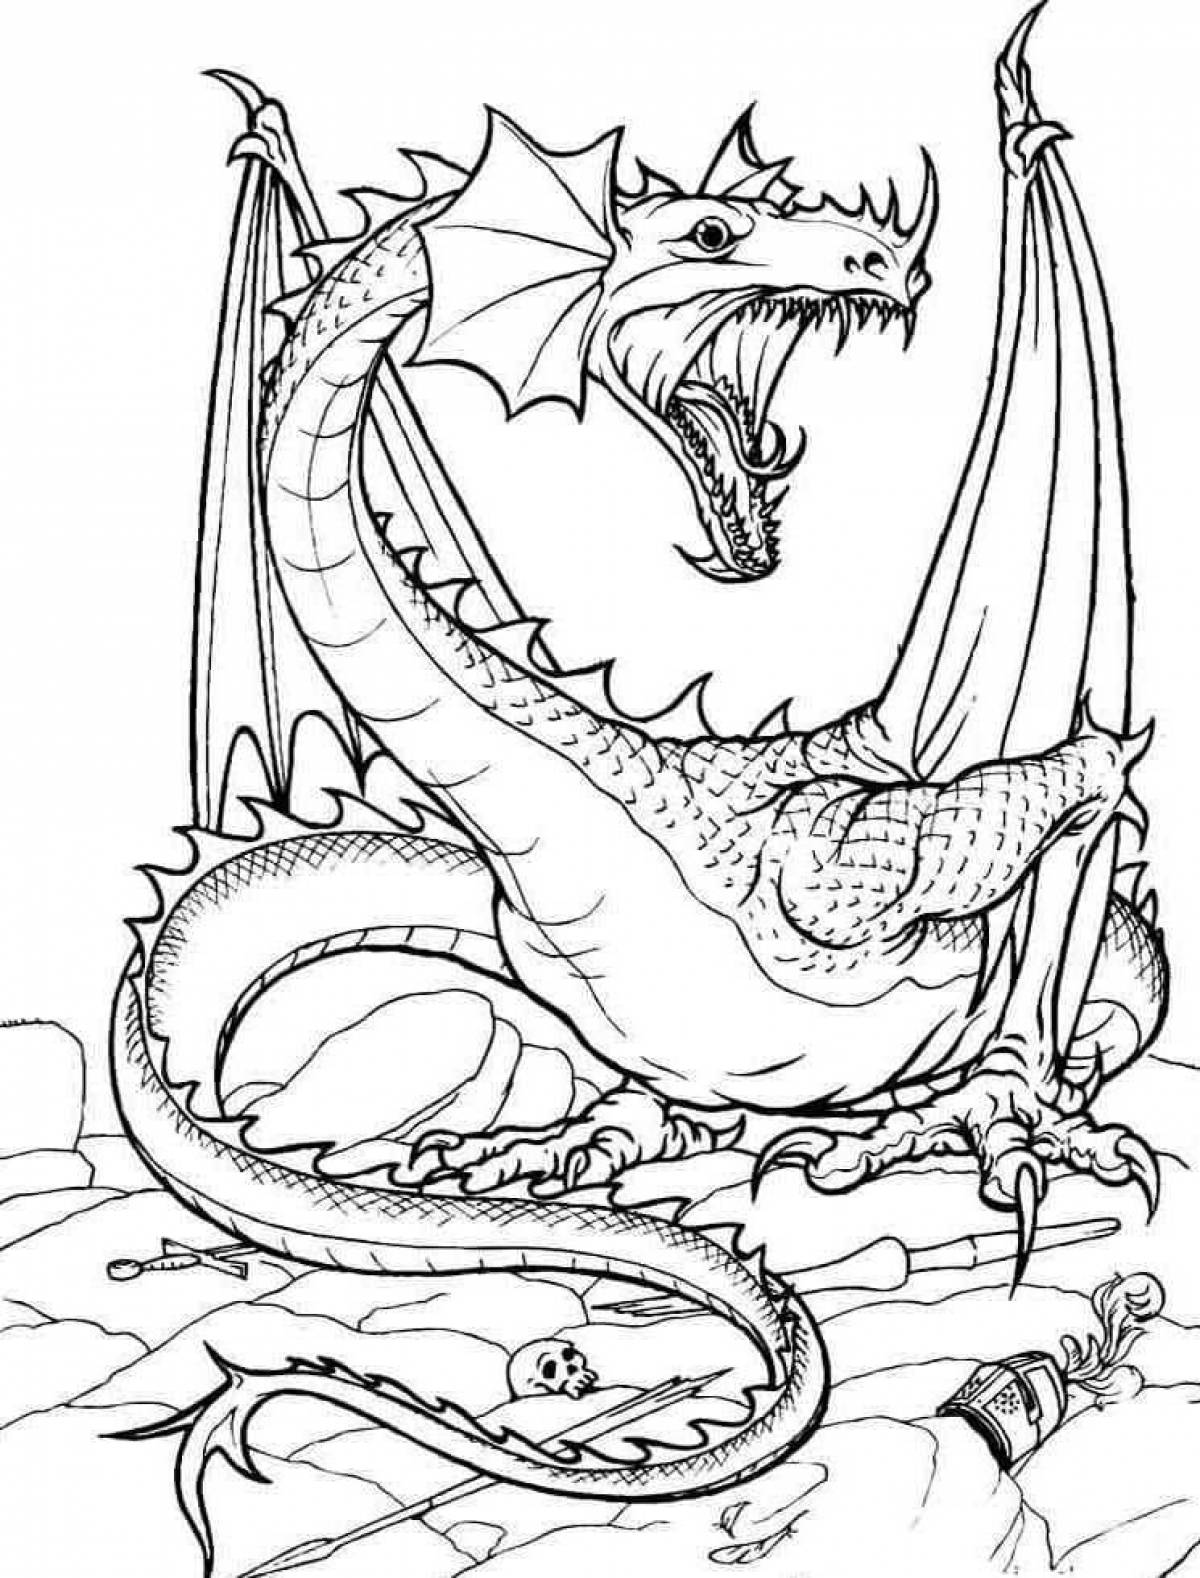 Glorious dragon coloring pages